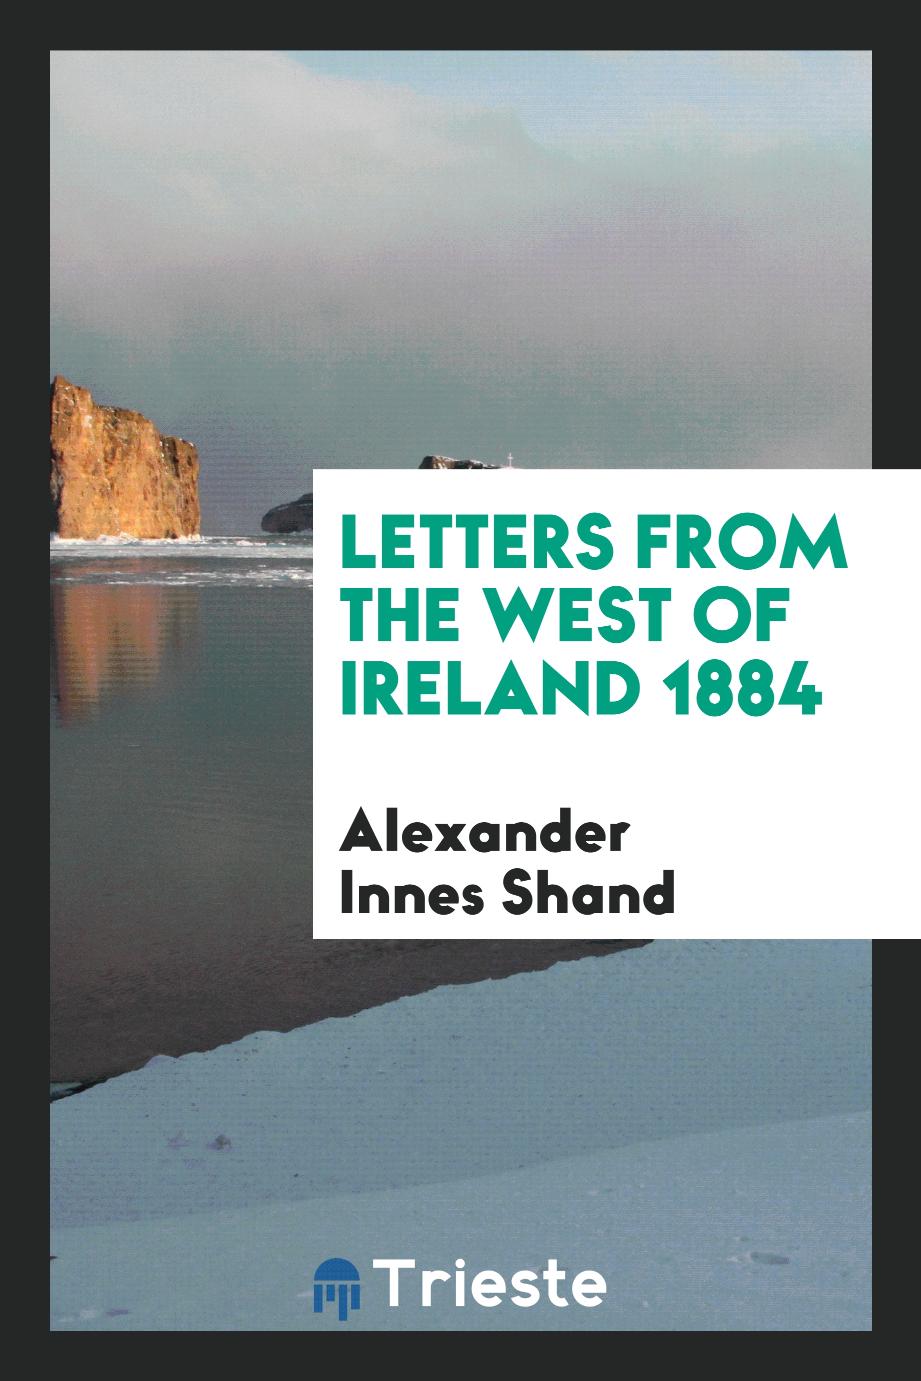 Letters from the West of Ireland 1884